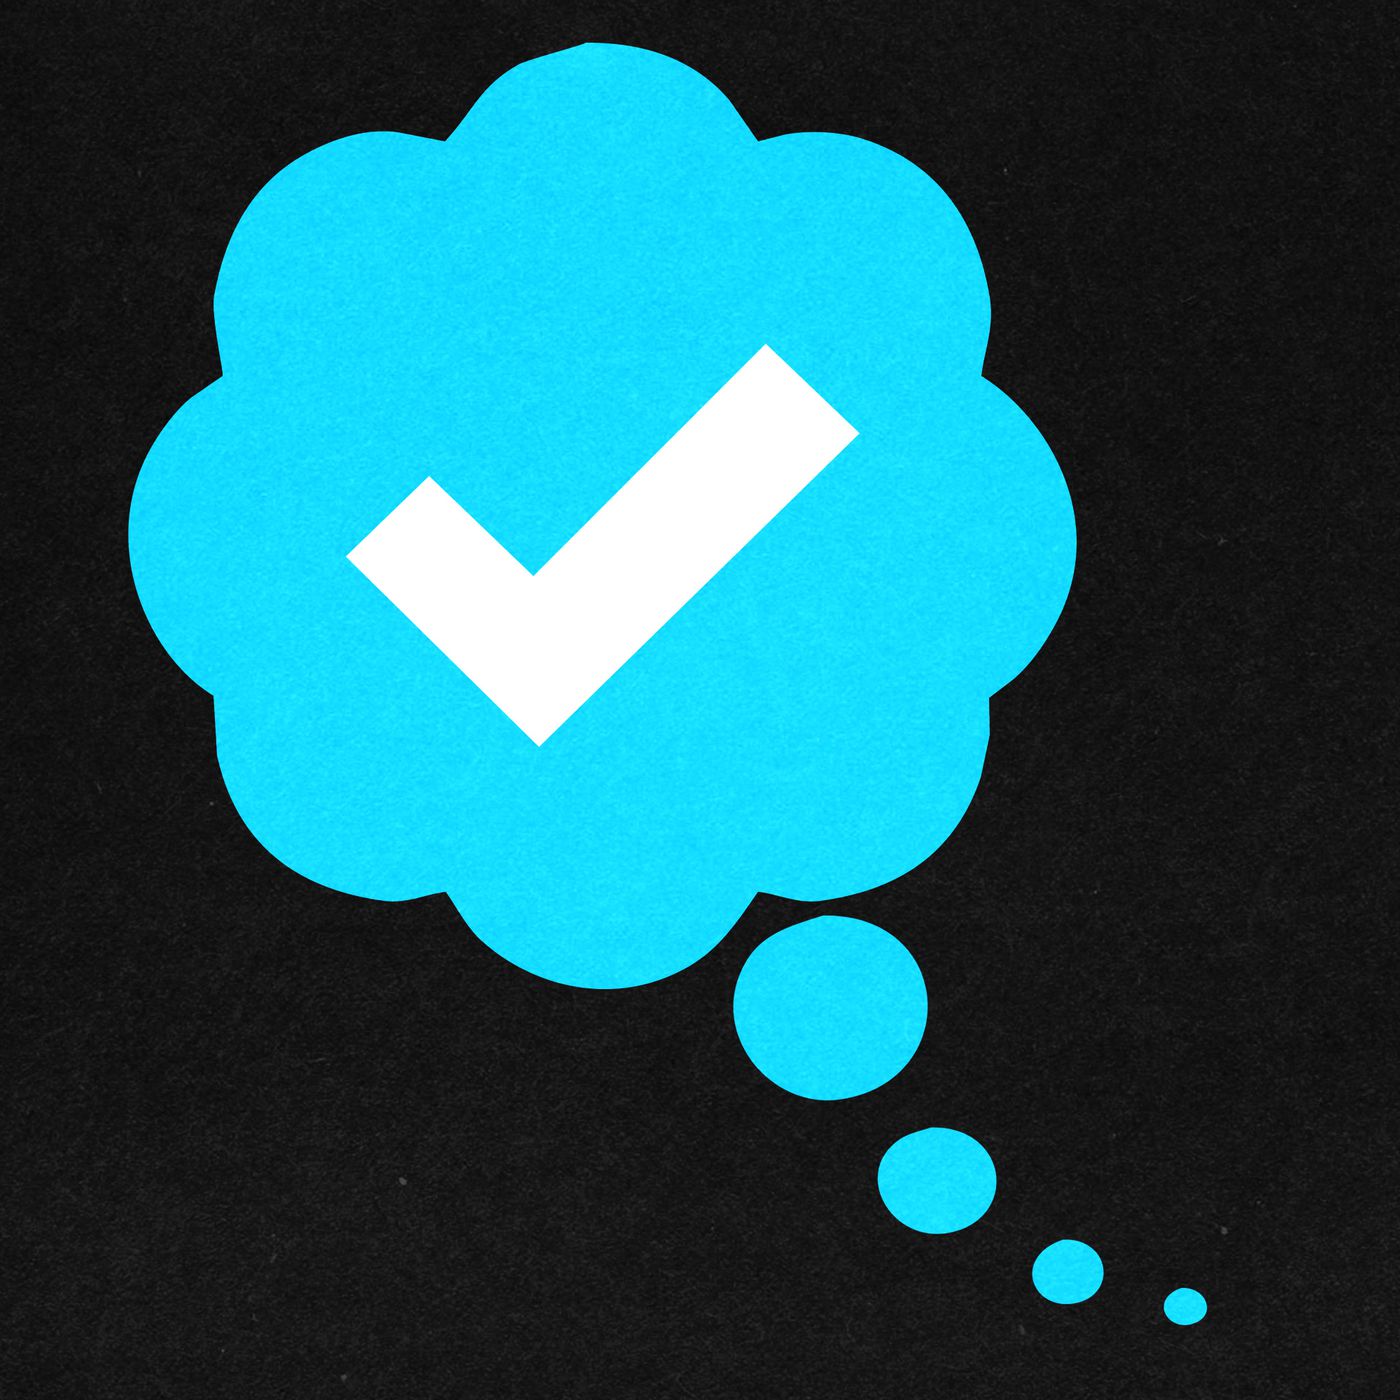 Does Verification Mean Anything Anymore? - The Ringer